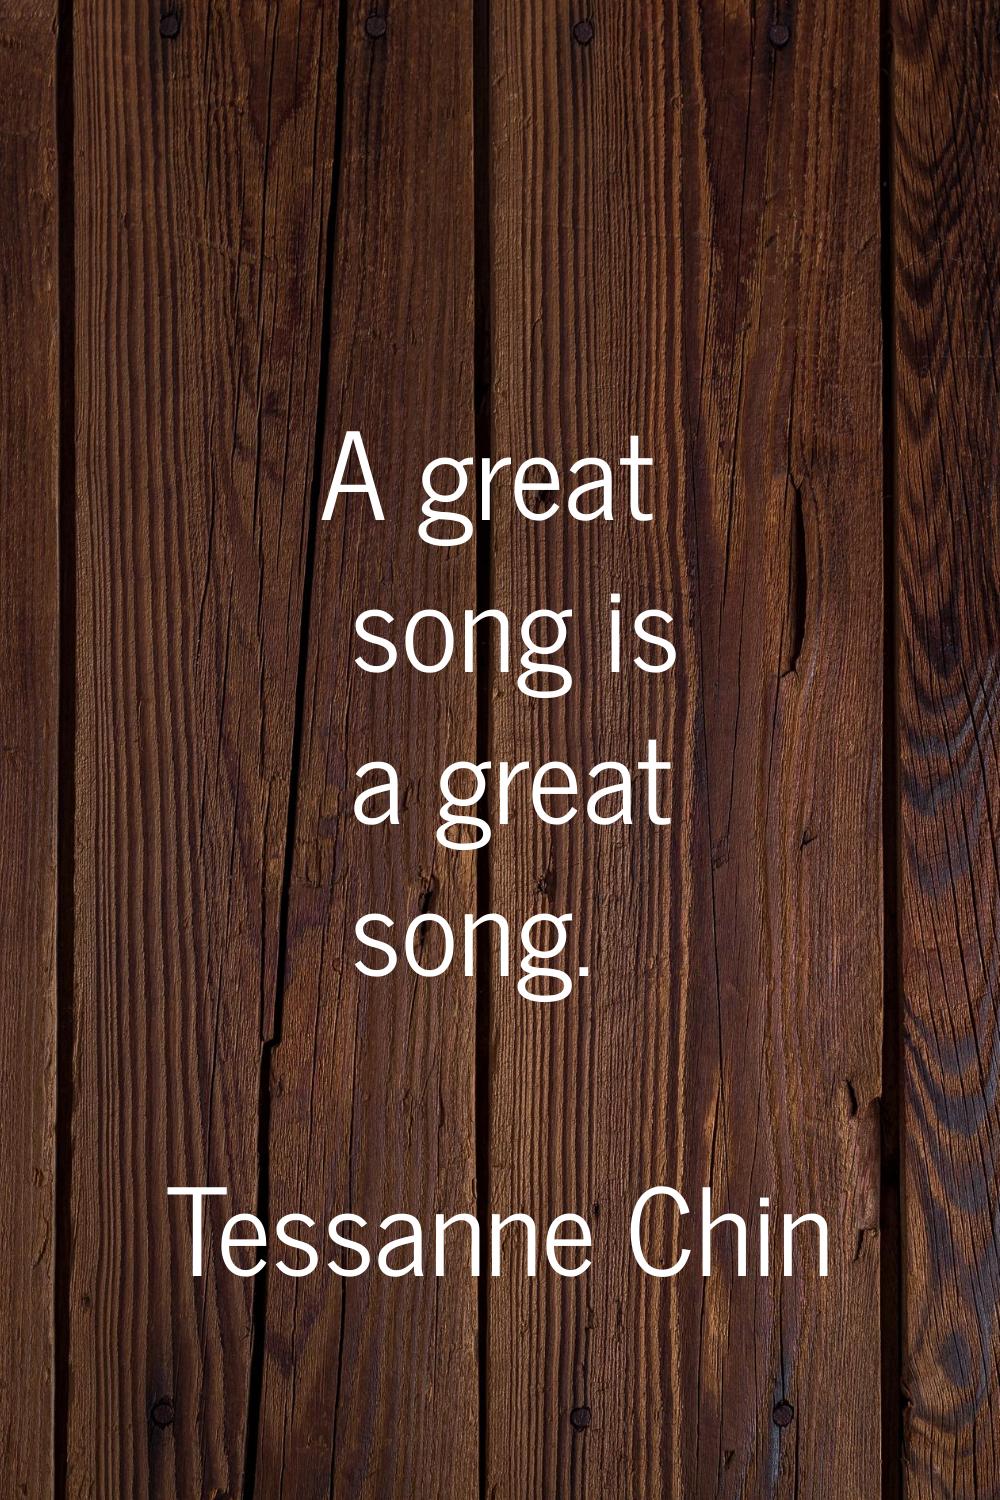 A great song is a great song.